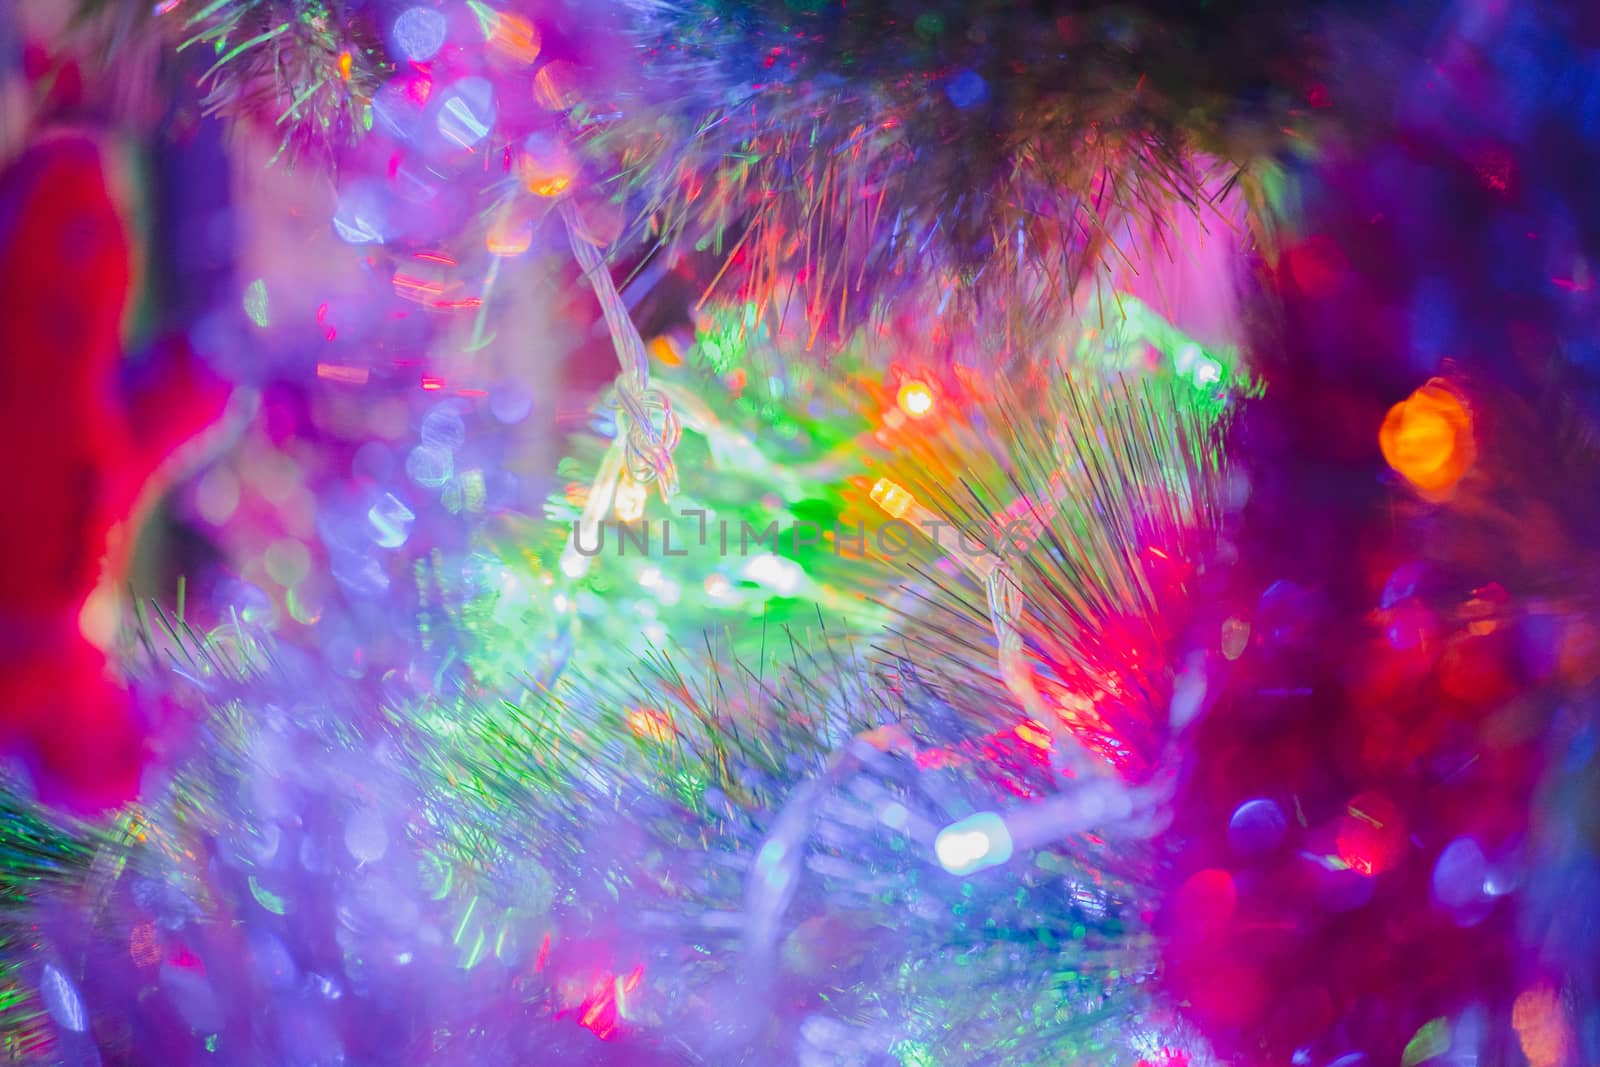 New Year lights in fir tree branches, close-up view. by photoboyko